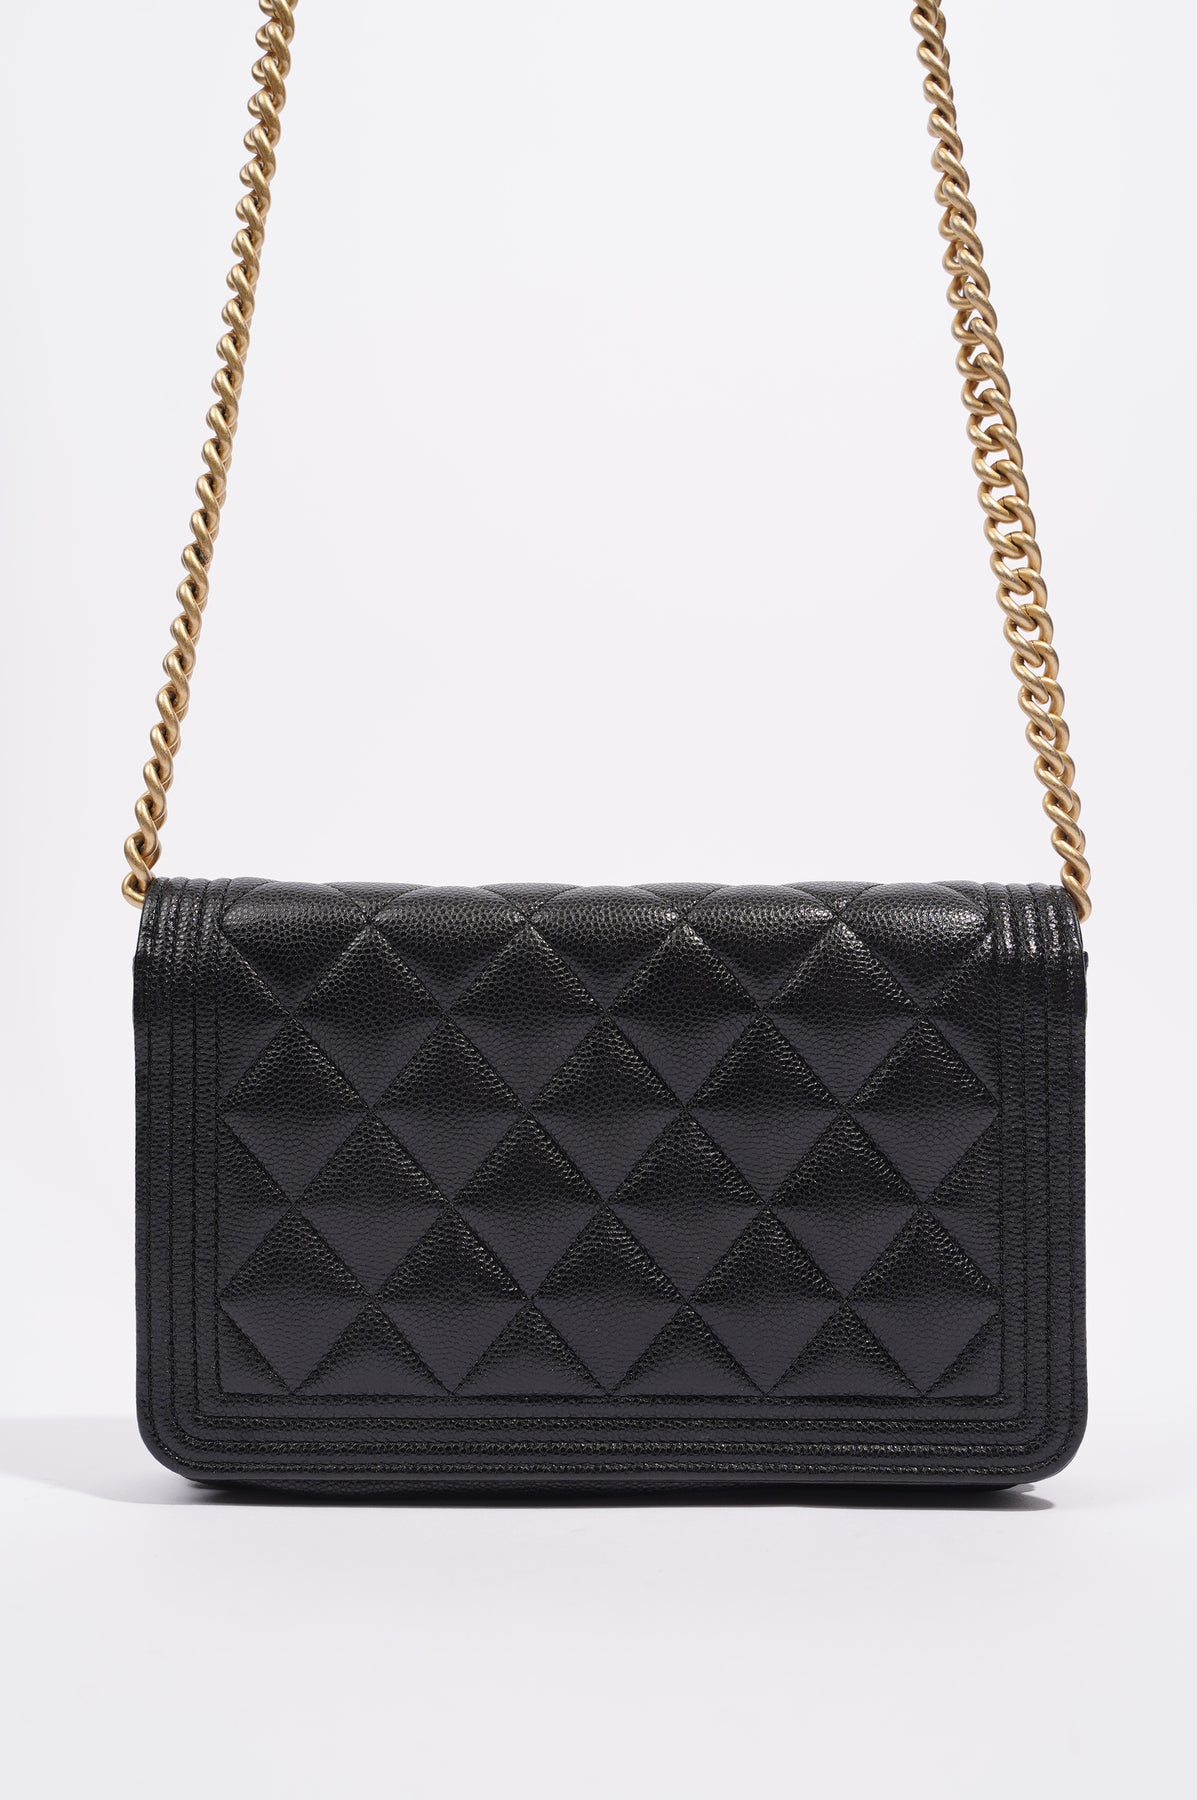 CHANEL, Bags, Chanel Wallet On A Chain Woc Black Caviar